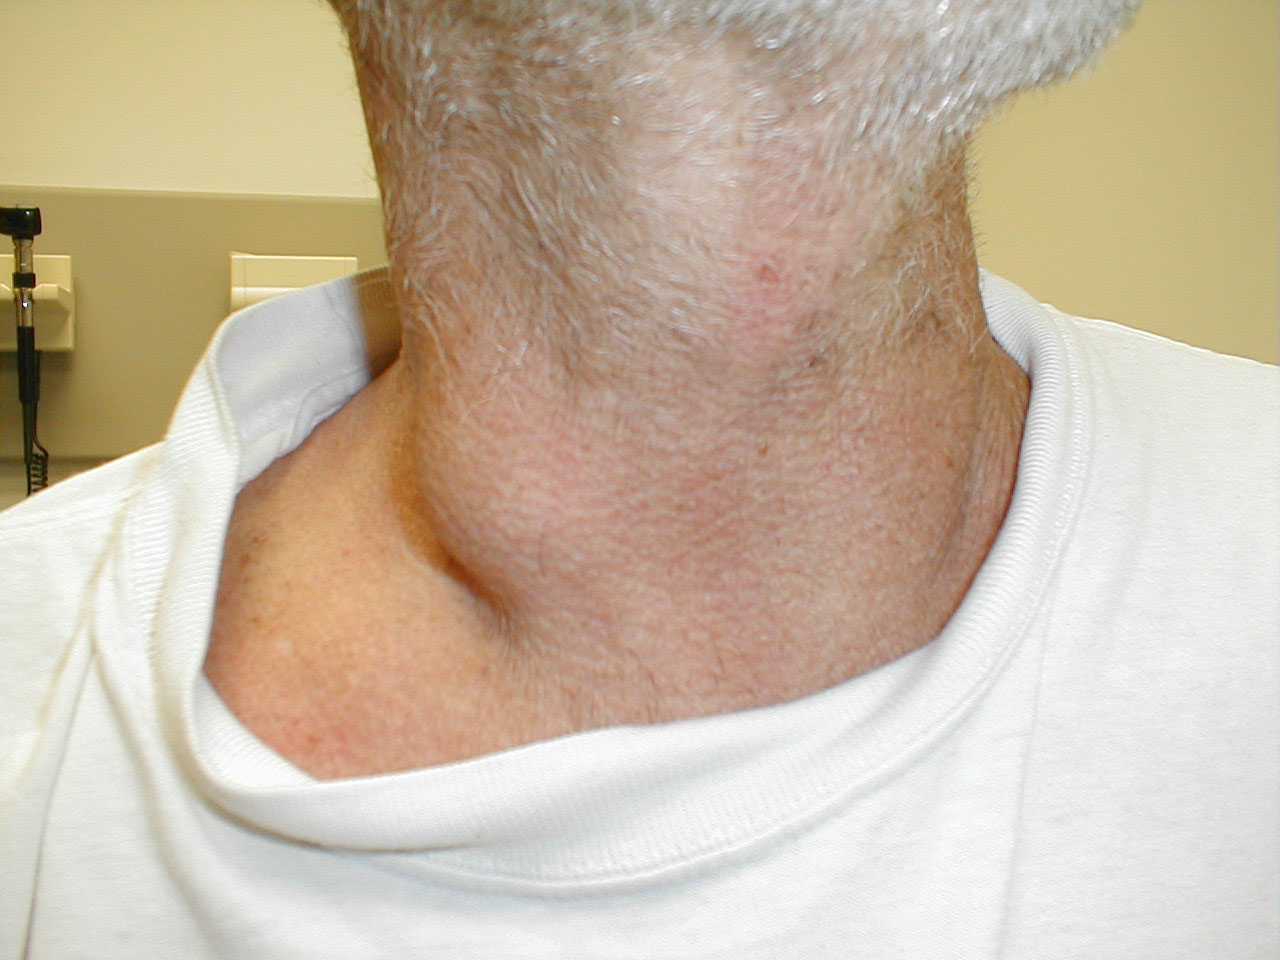 Cervical Adenopathy: Large right anterior cervical lymph node.